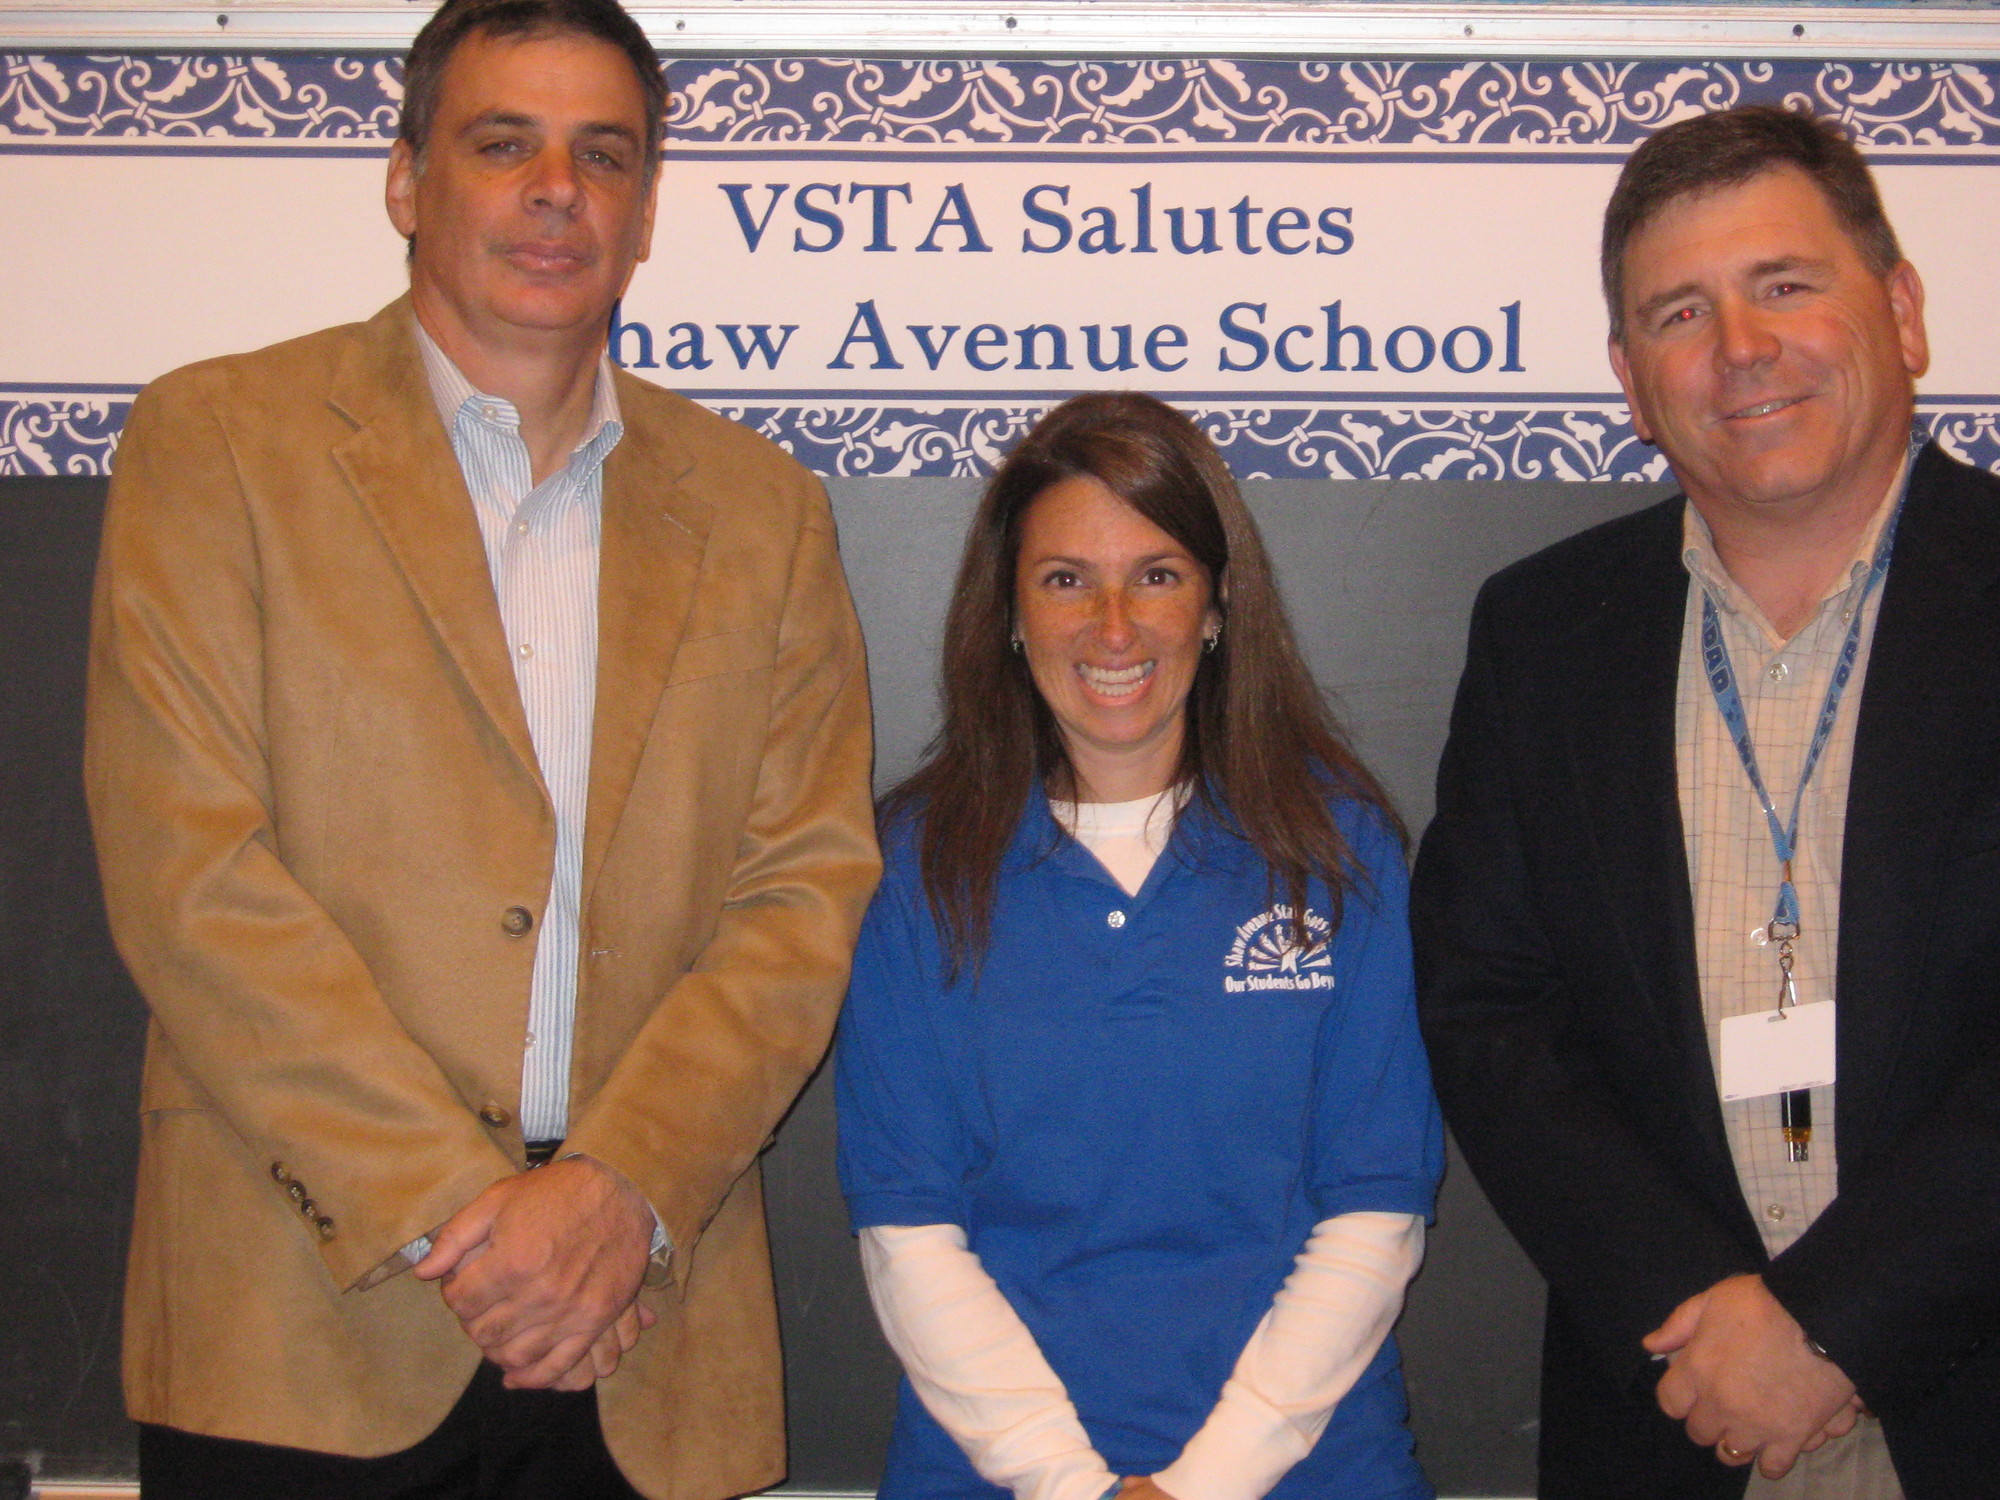 Shaw Avenue School Principal Amy Pernick was joined by VSTA leaders Patrick Naglieri, left, and Richie Adams.